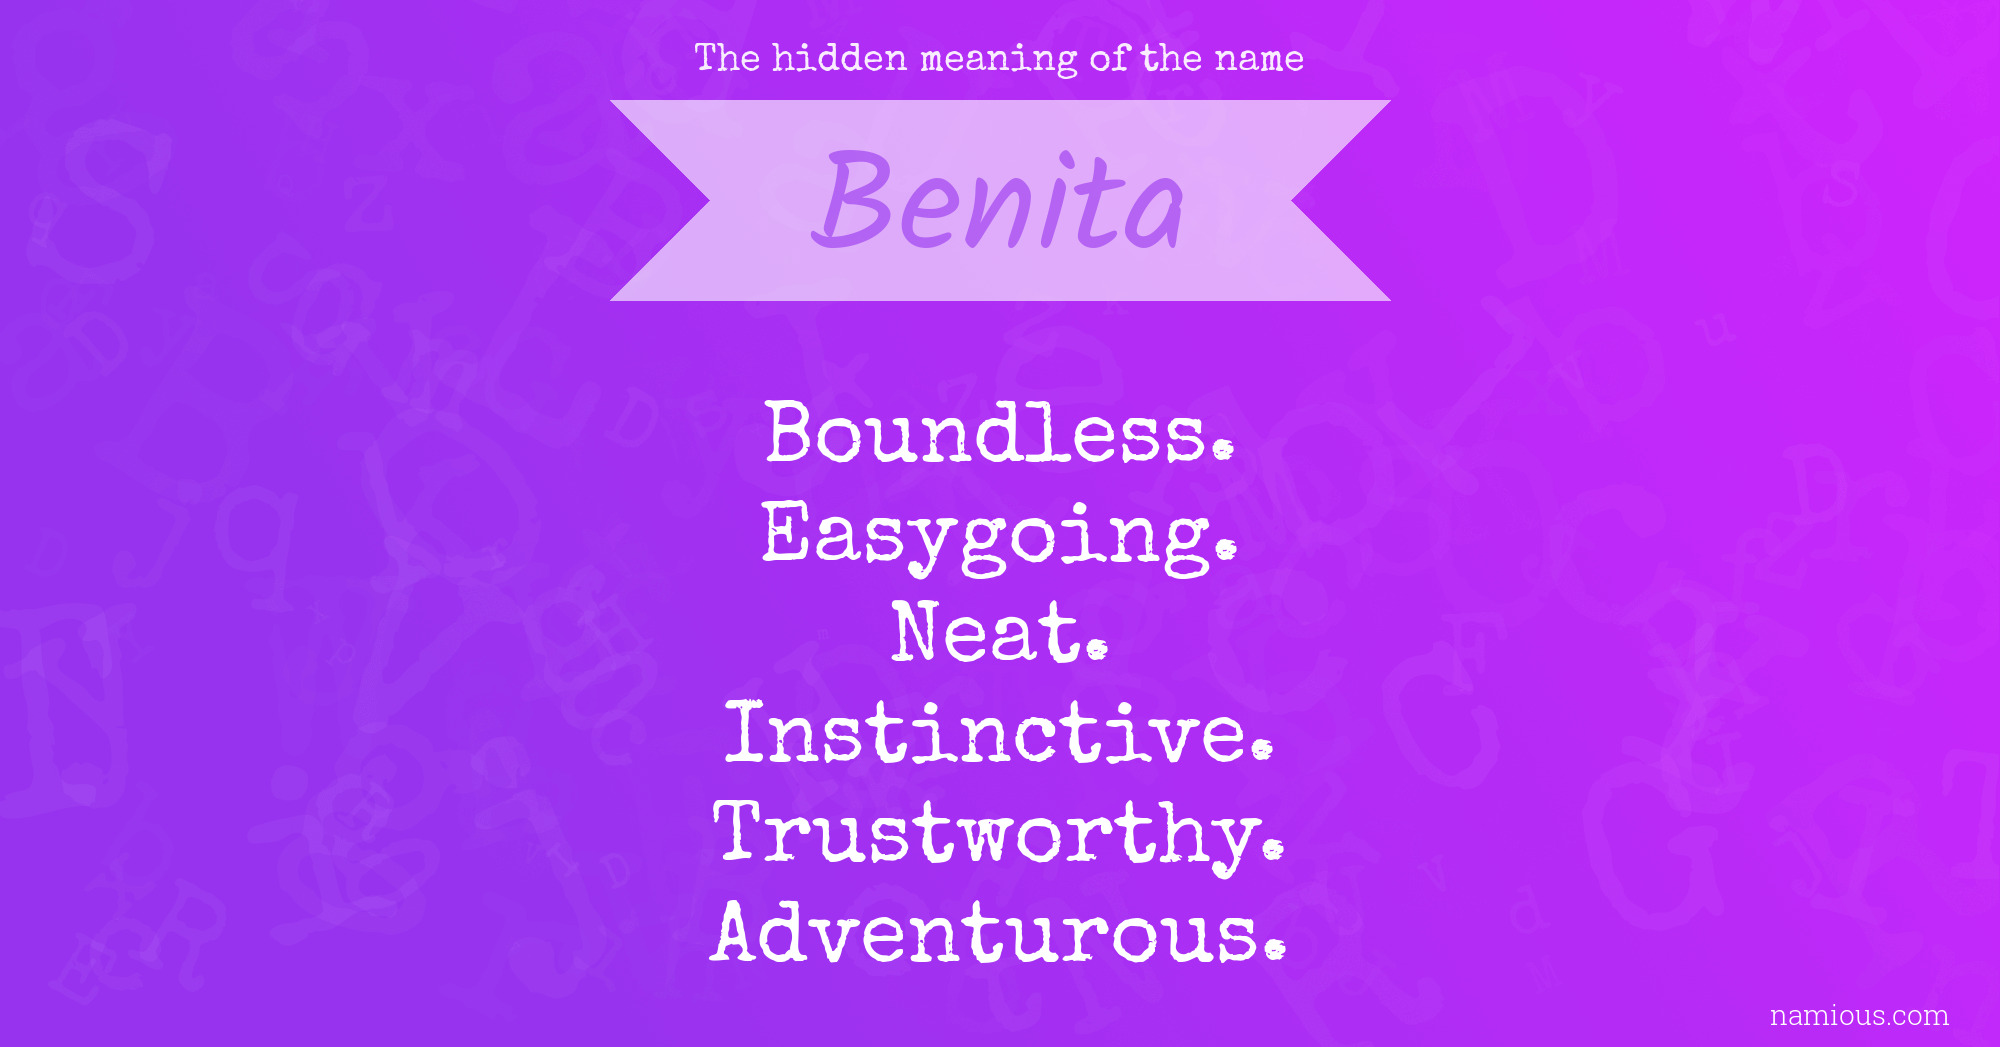 The hidden meaning of the name Benita